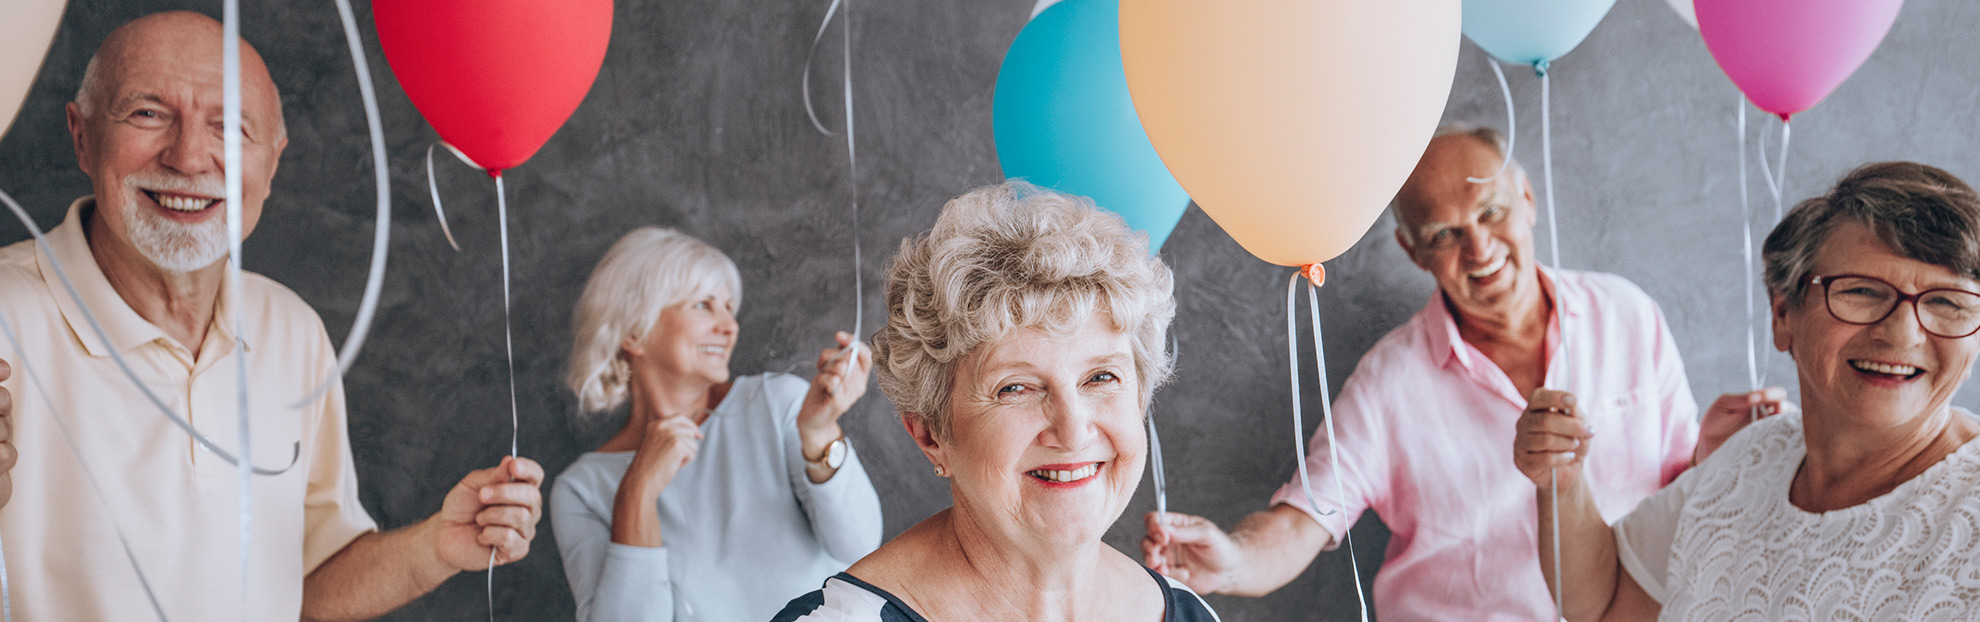 Cataract surgery patient able to enjoy birthday party more clearly